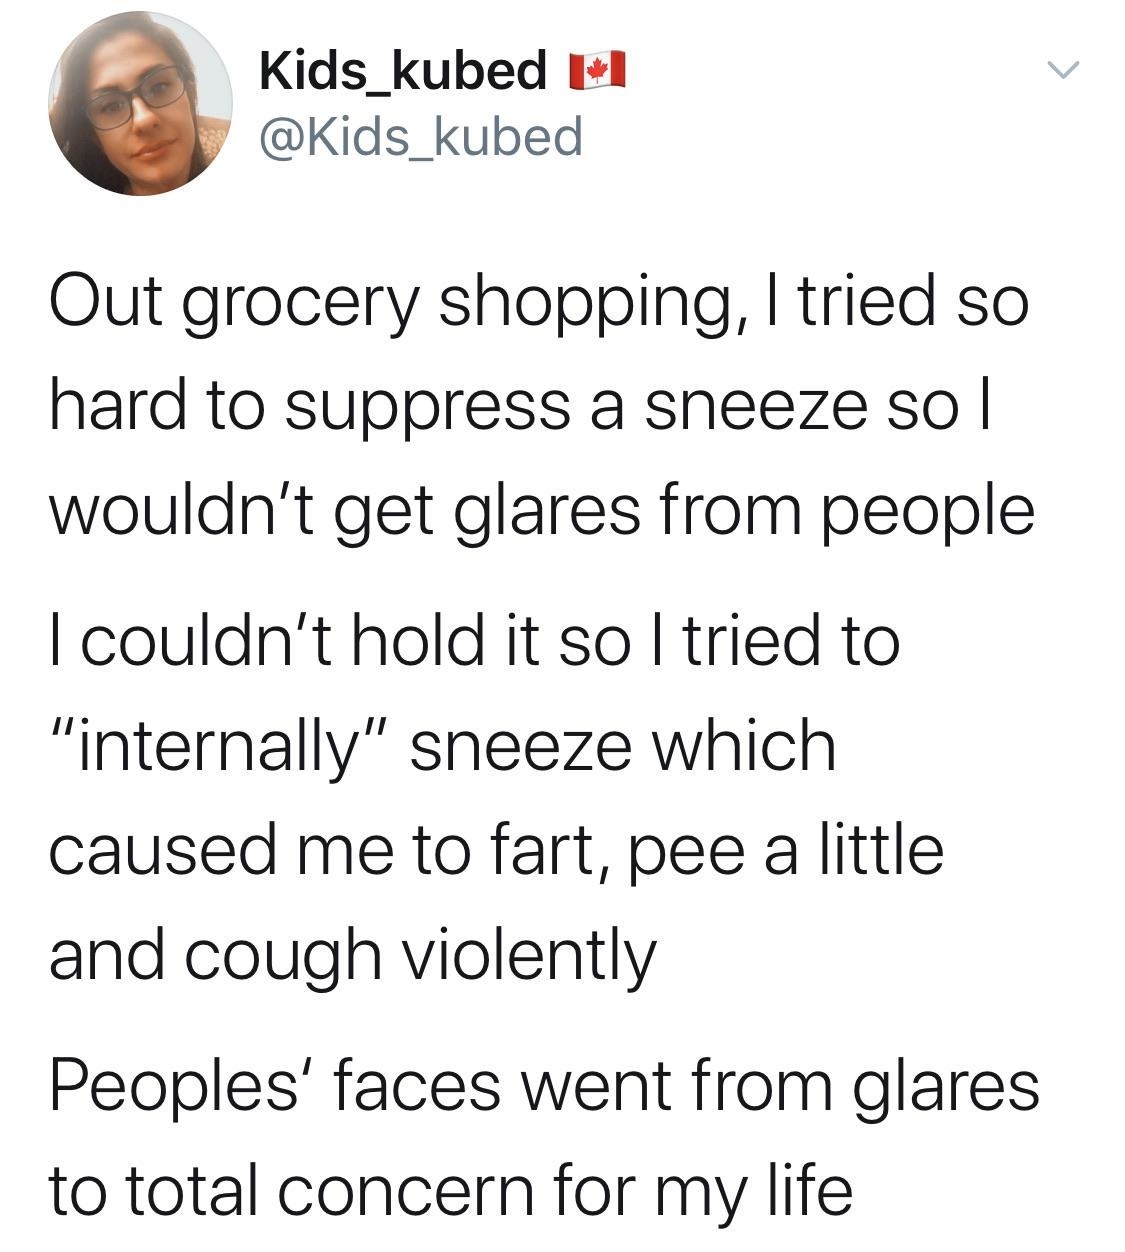 Person who tries to avoid sneezing in the store ends up farting, peeing, and coughing violently